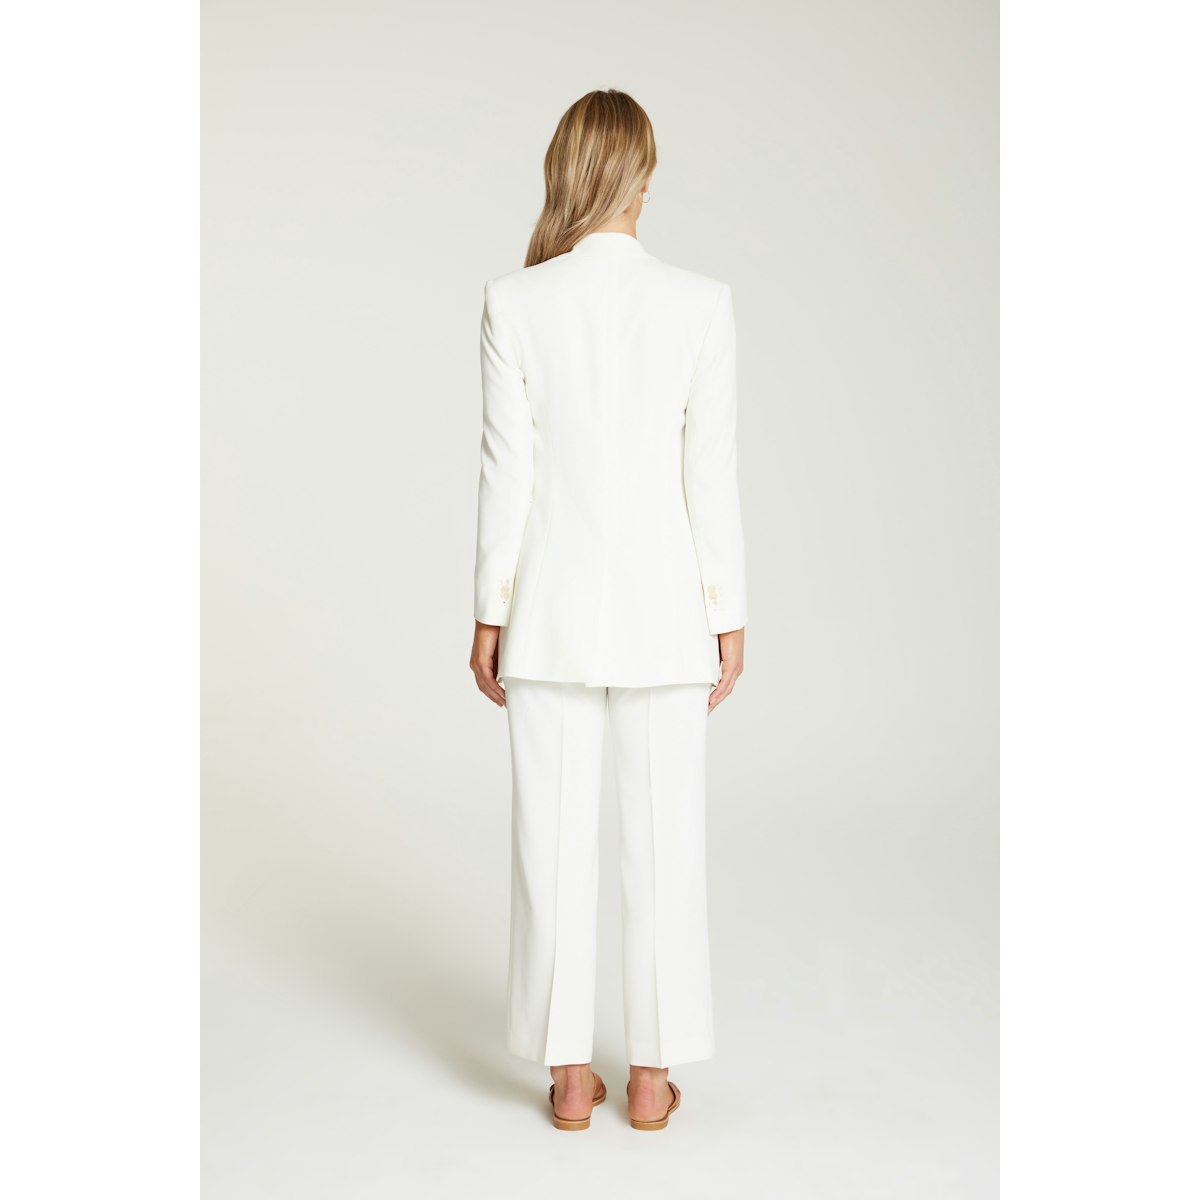 InStitchu Collection The Hepworth White Jacket